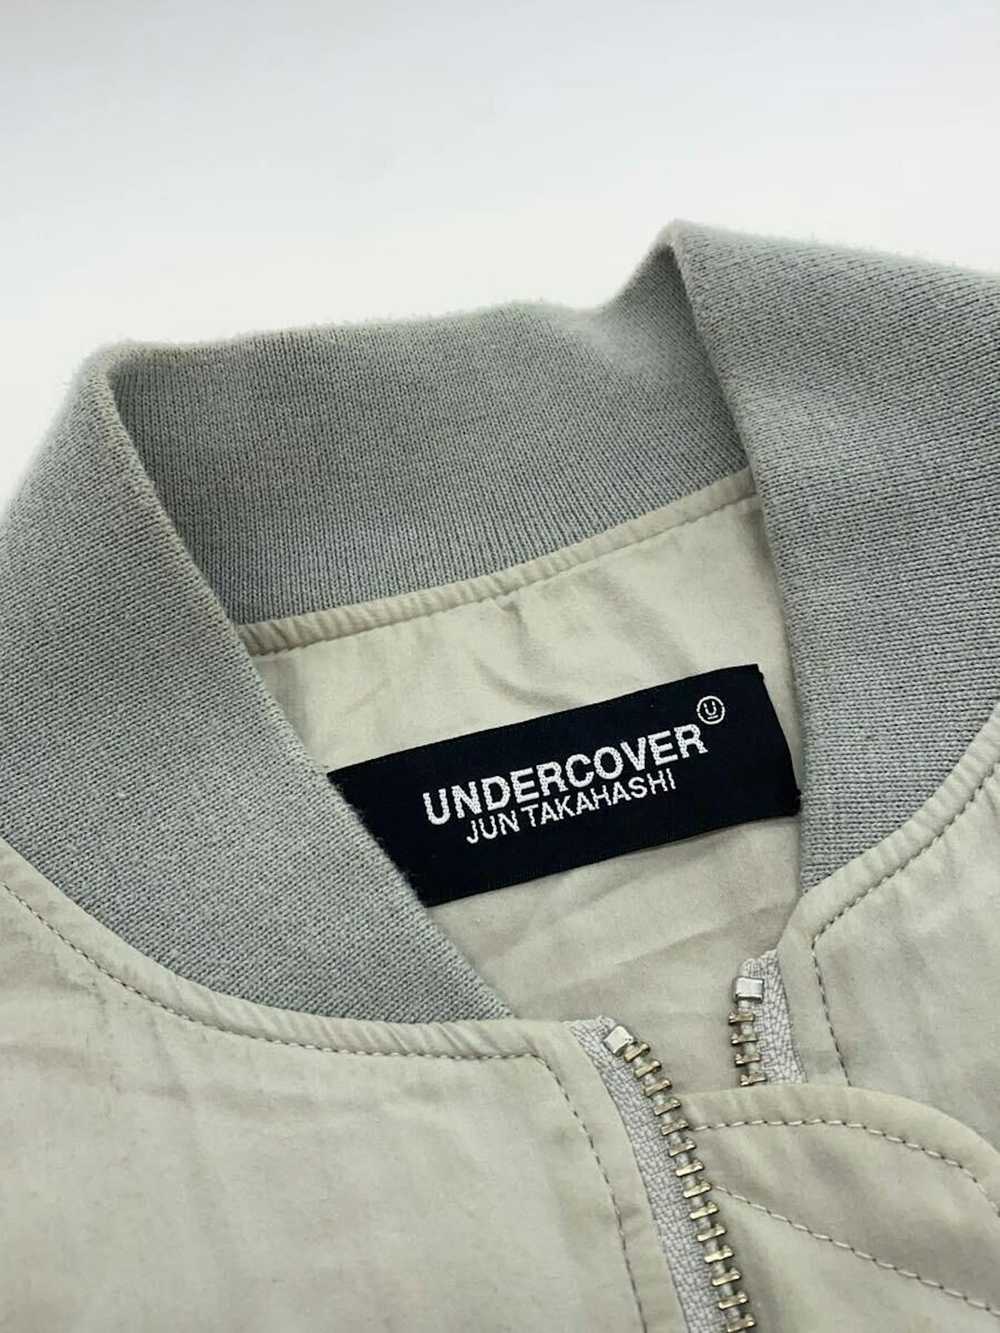 Undercover SS19 The Dead Hermits Vest - image 6